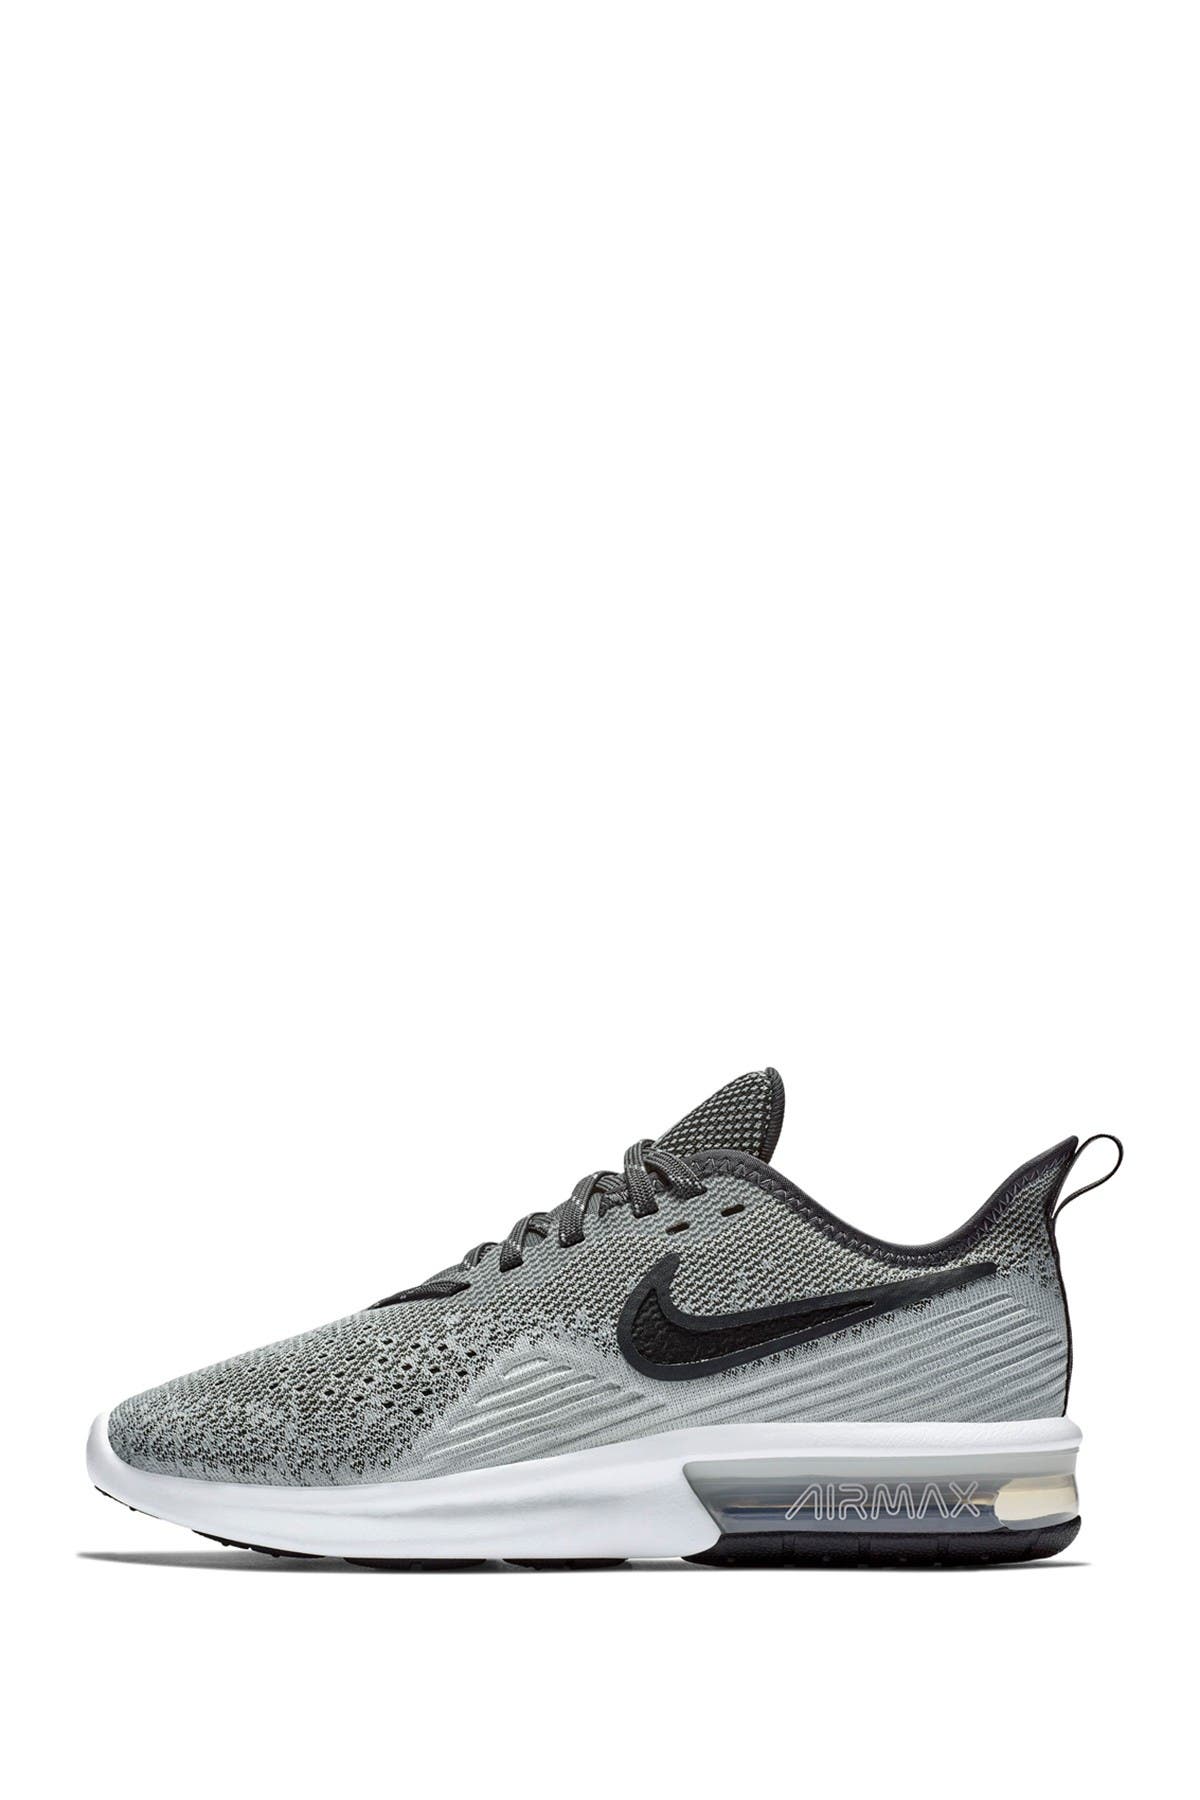 nike air max sequent 4 men's